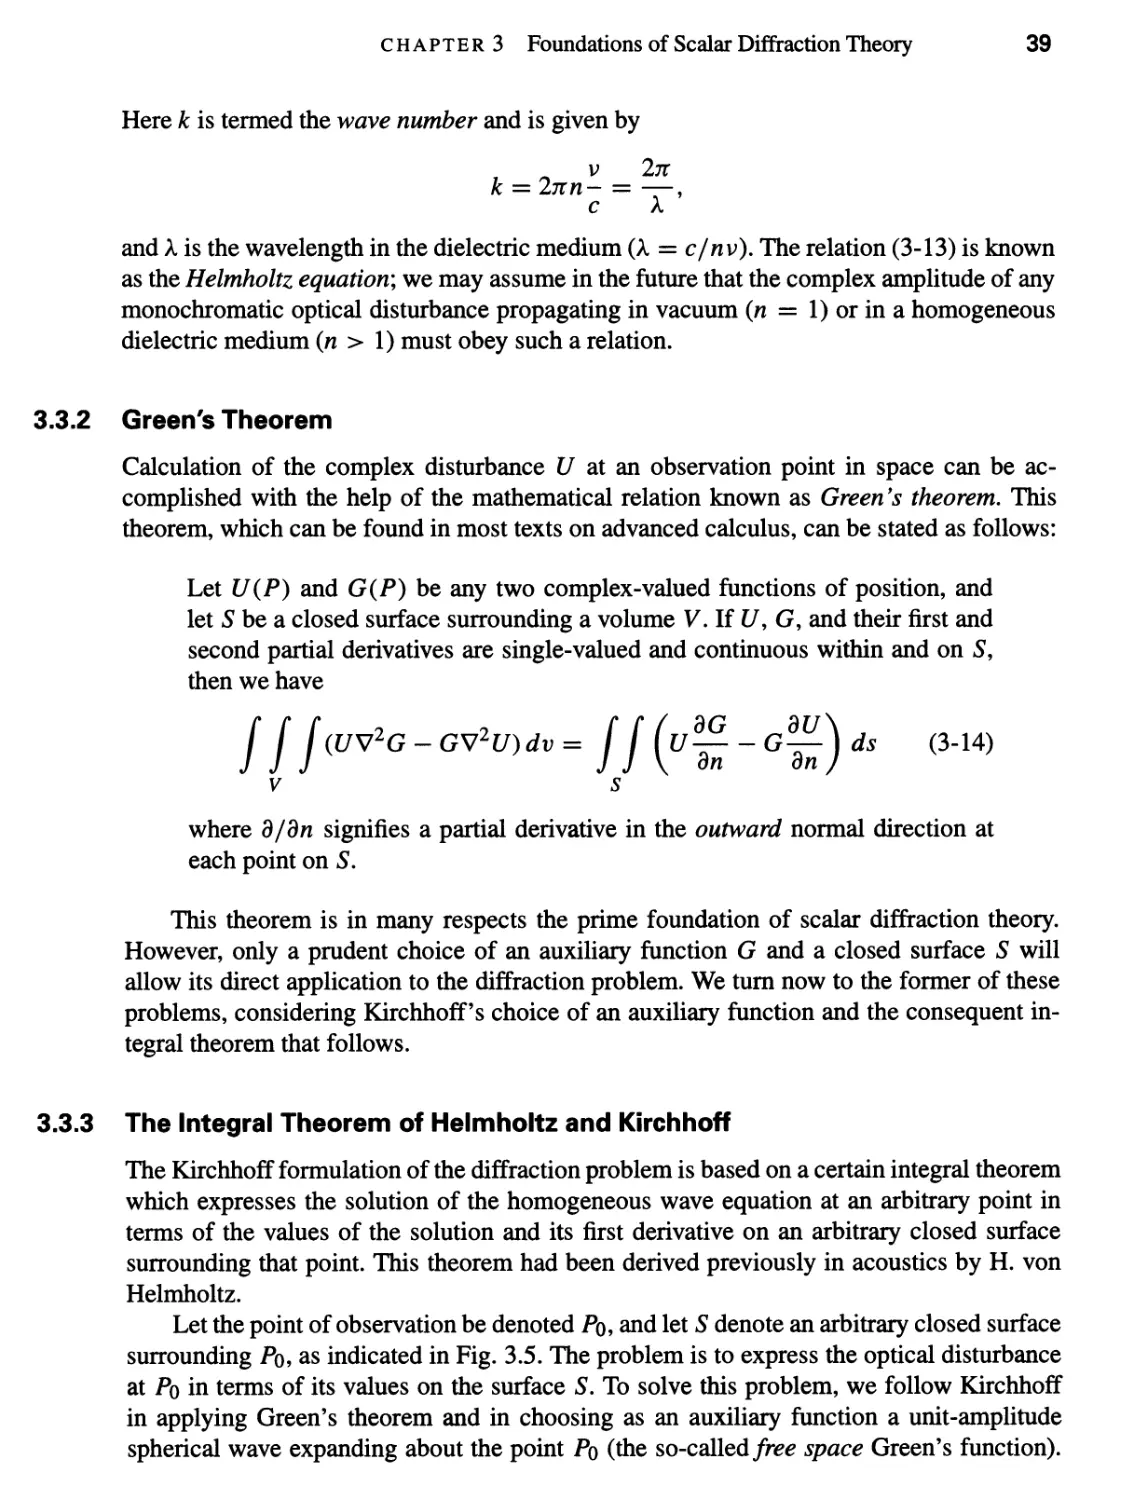 3.3.2 Green’s Theorem 39
3.3.3 The Integral Theorem of Helmholtz and Kirchhoff 39